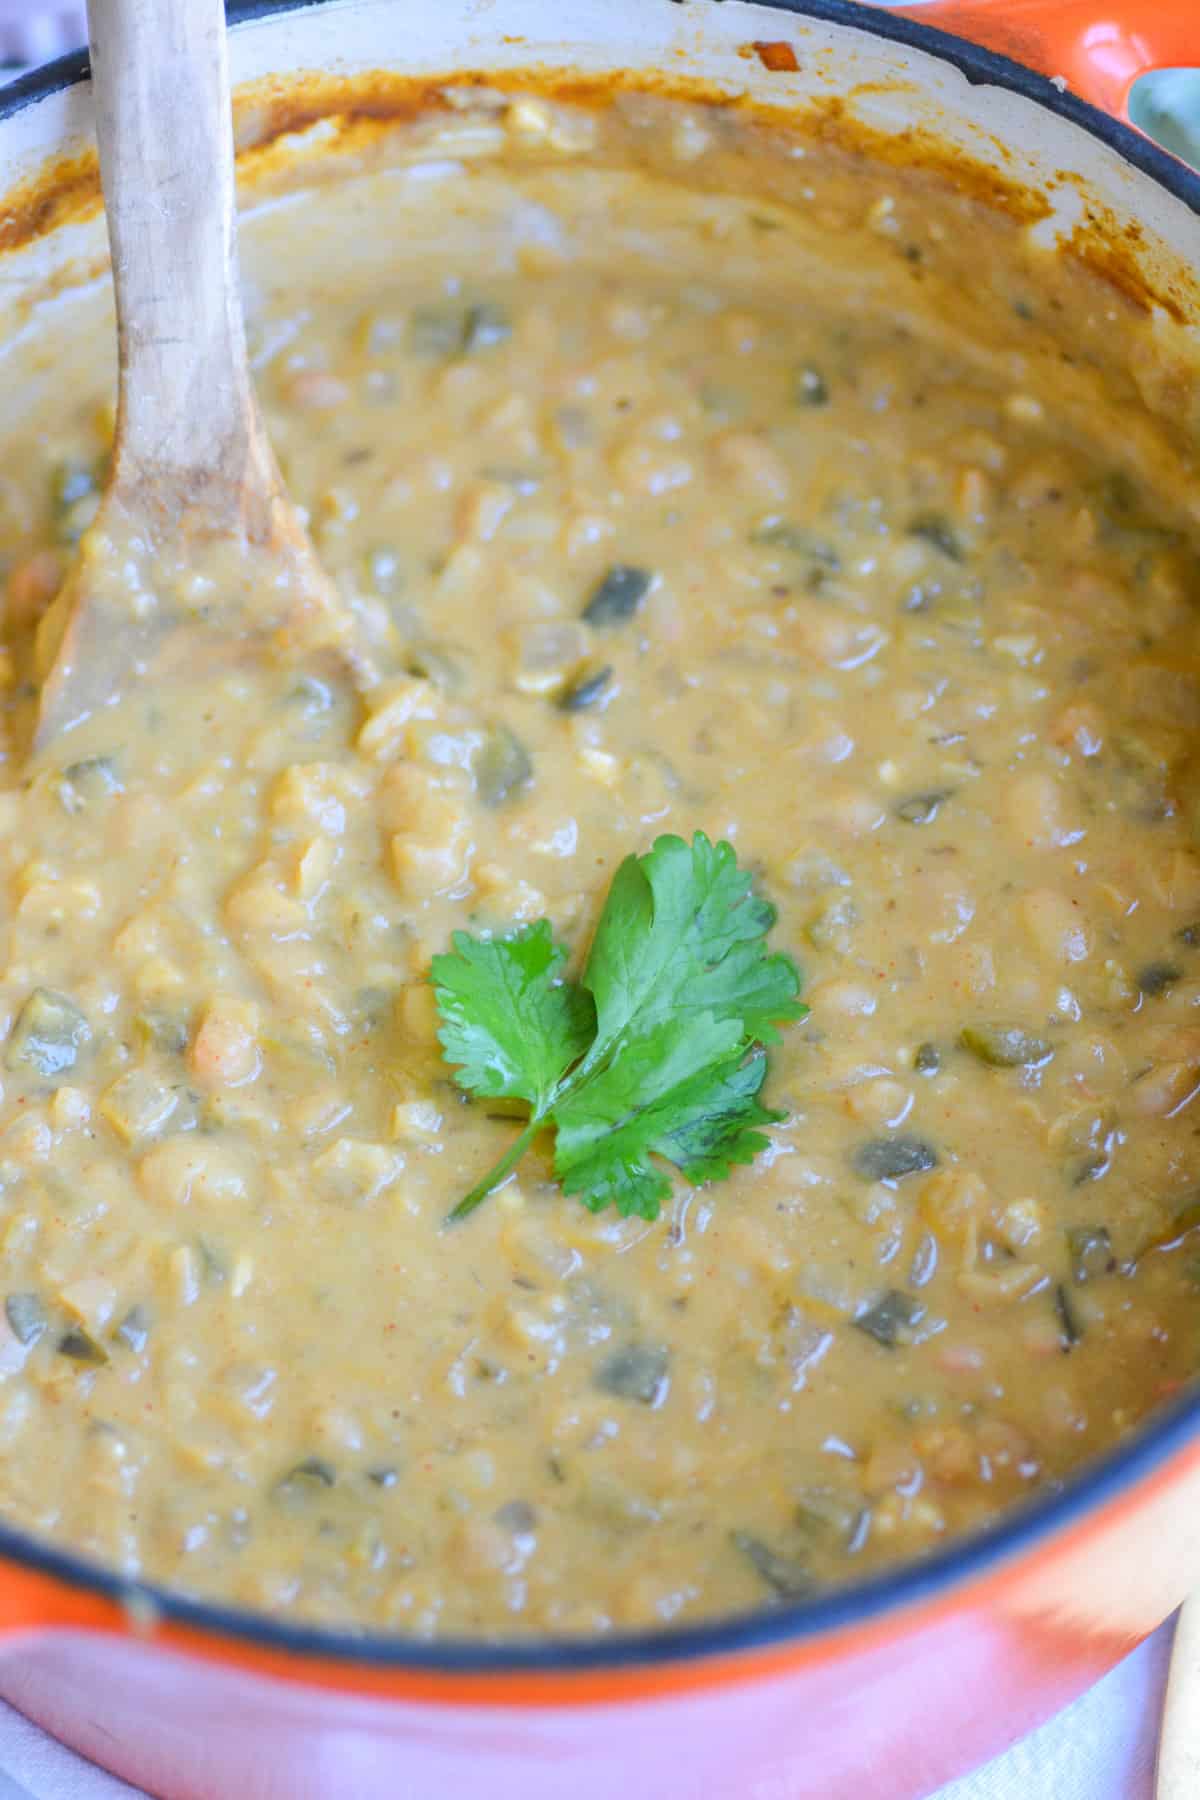 Finished Creamy Vegan White Chili with topped with cilantro.